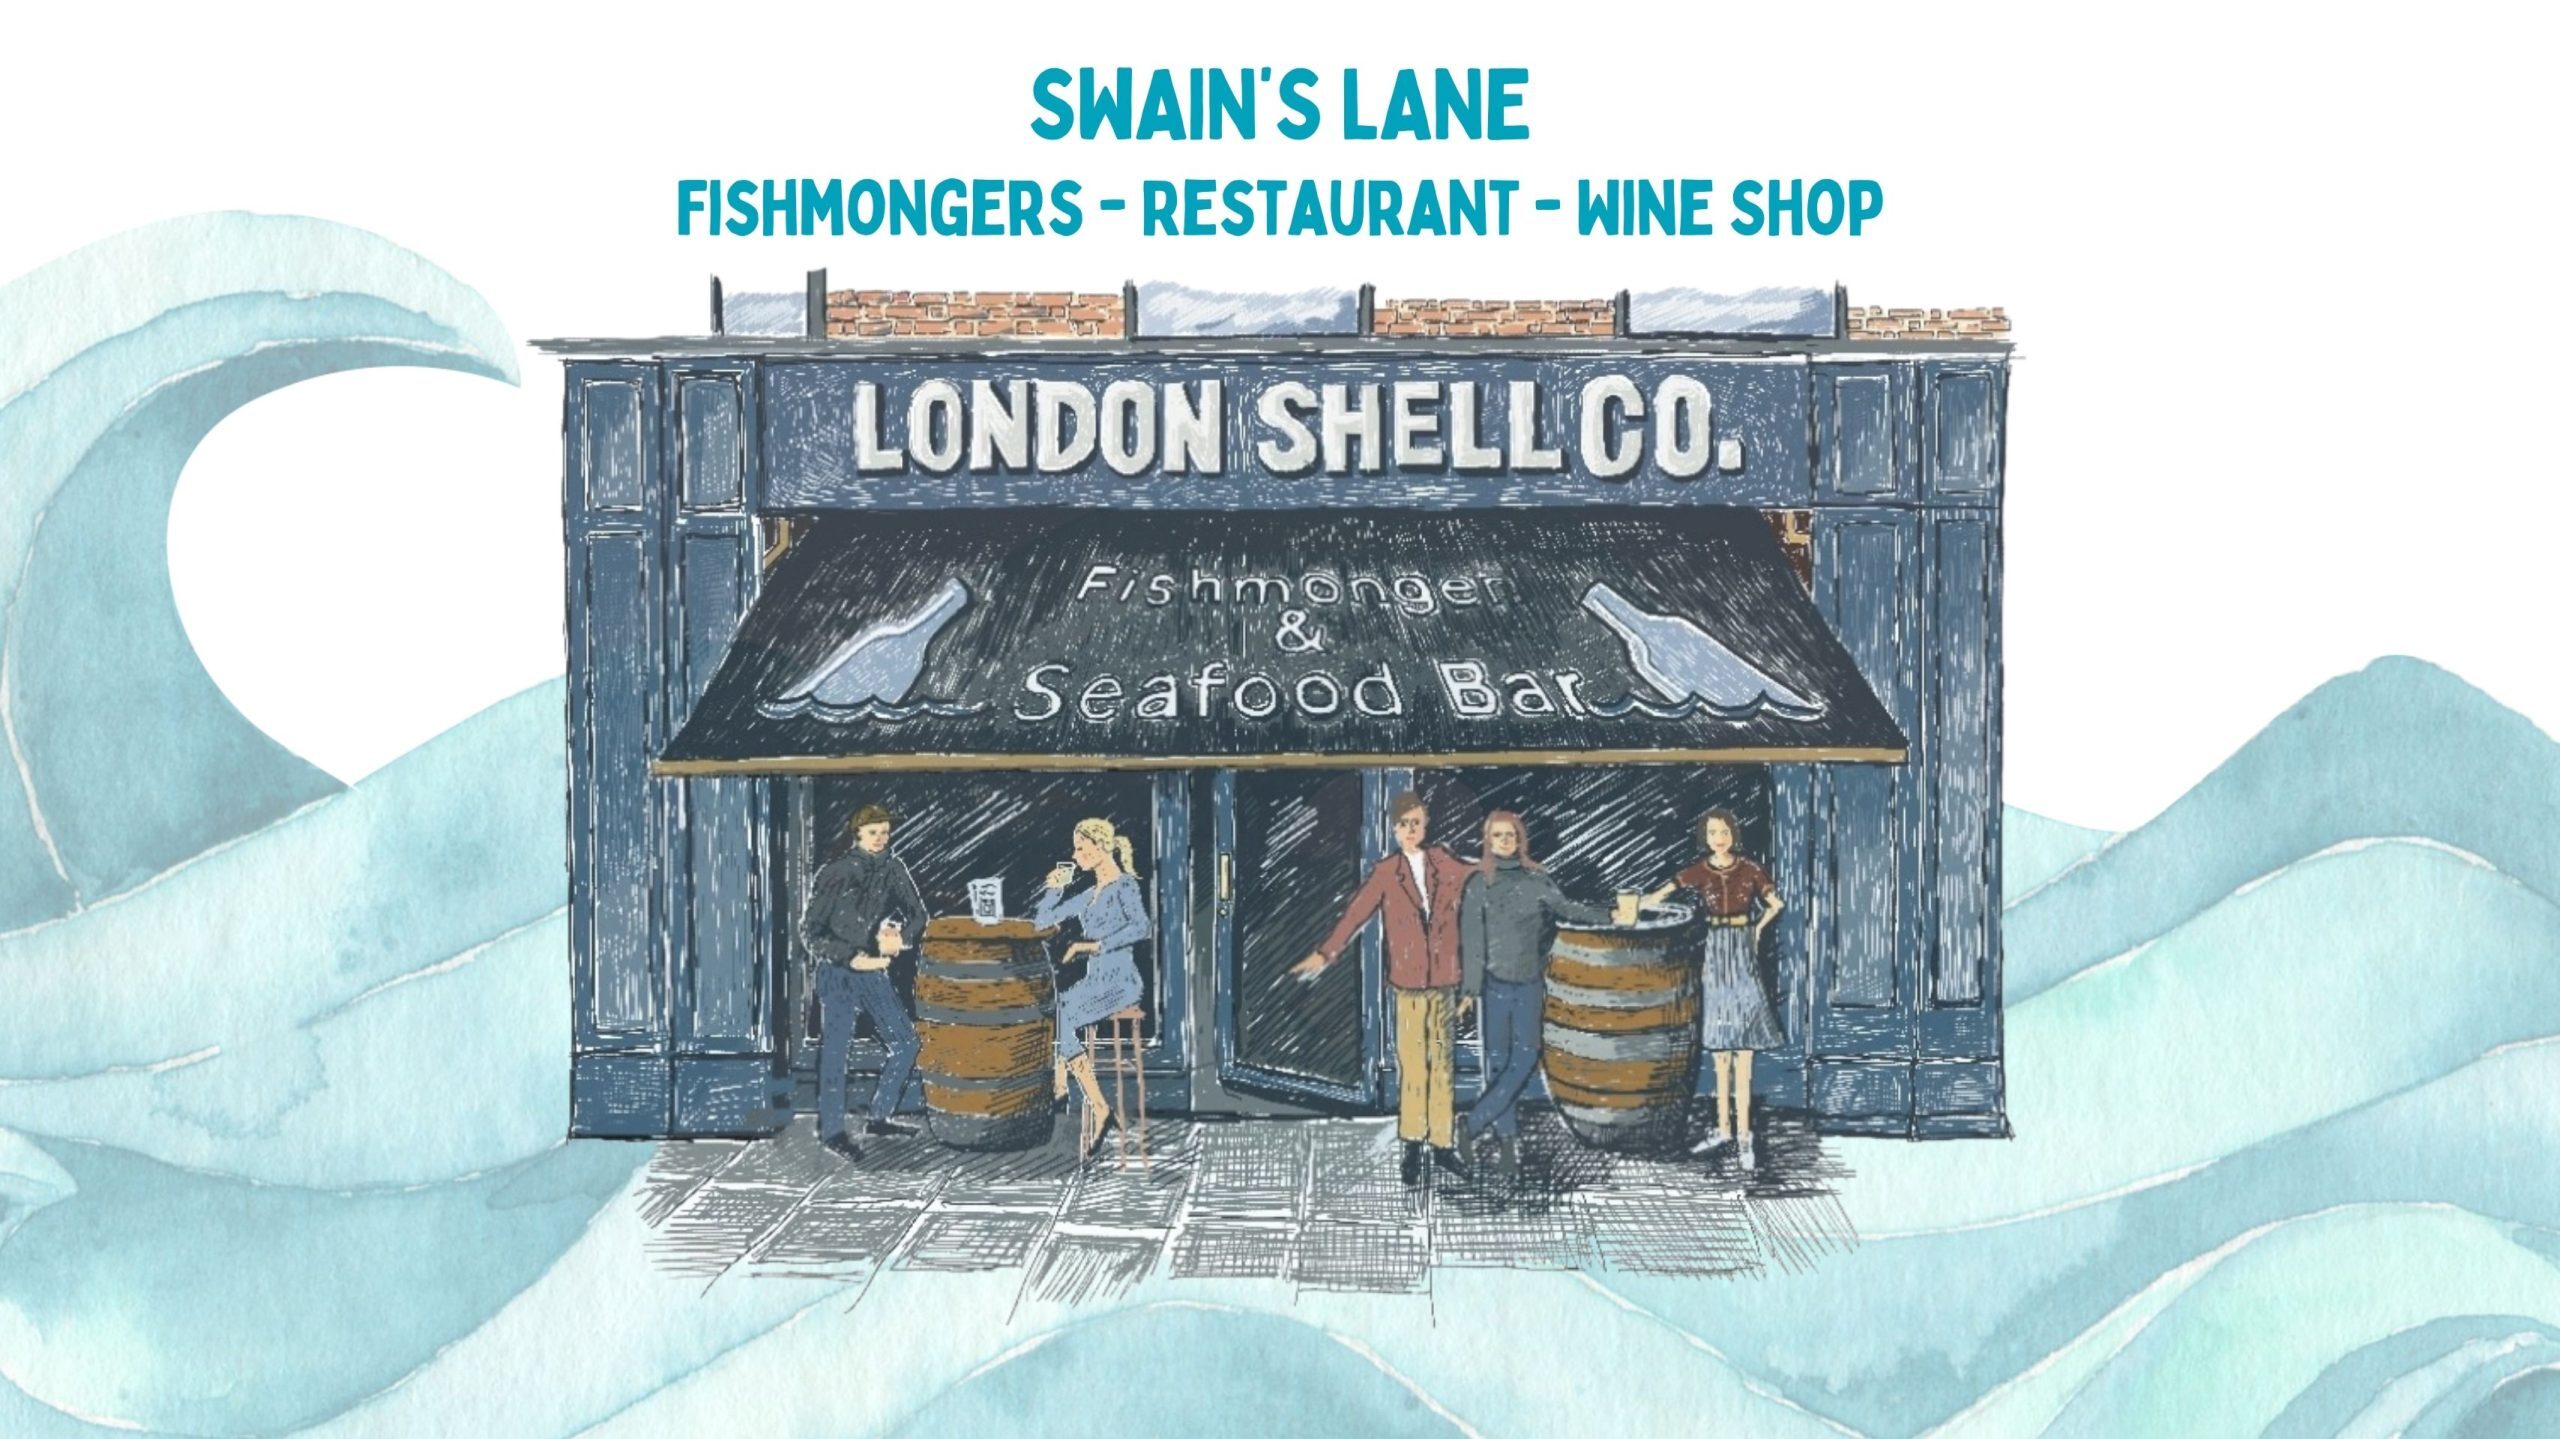 Illustration of the exterior of London Shell Co. on Swain's Lane. It is blue and has waves behind